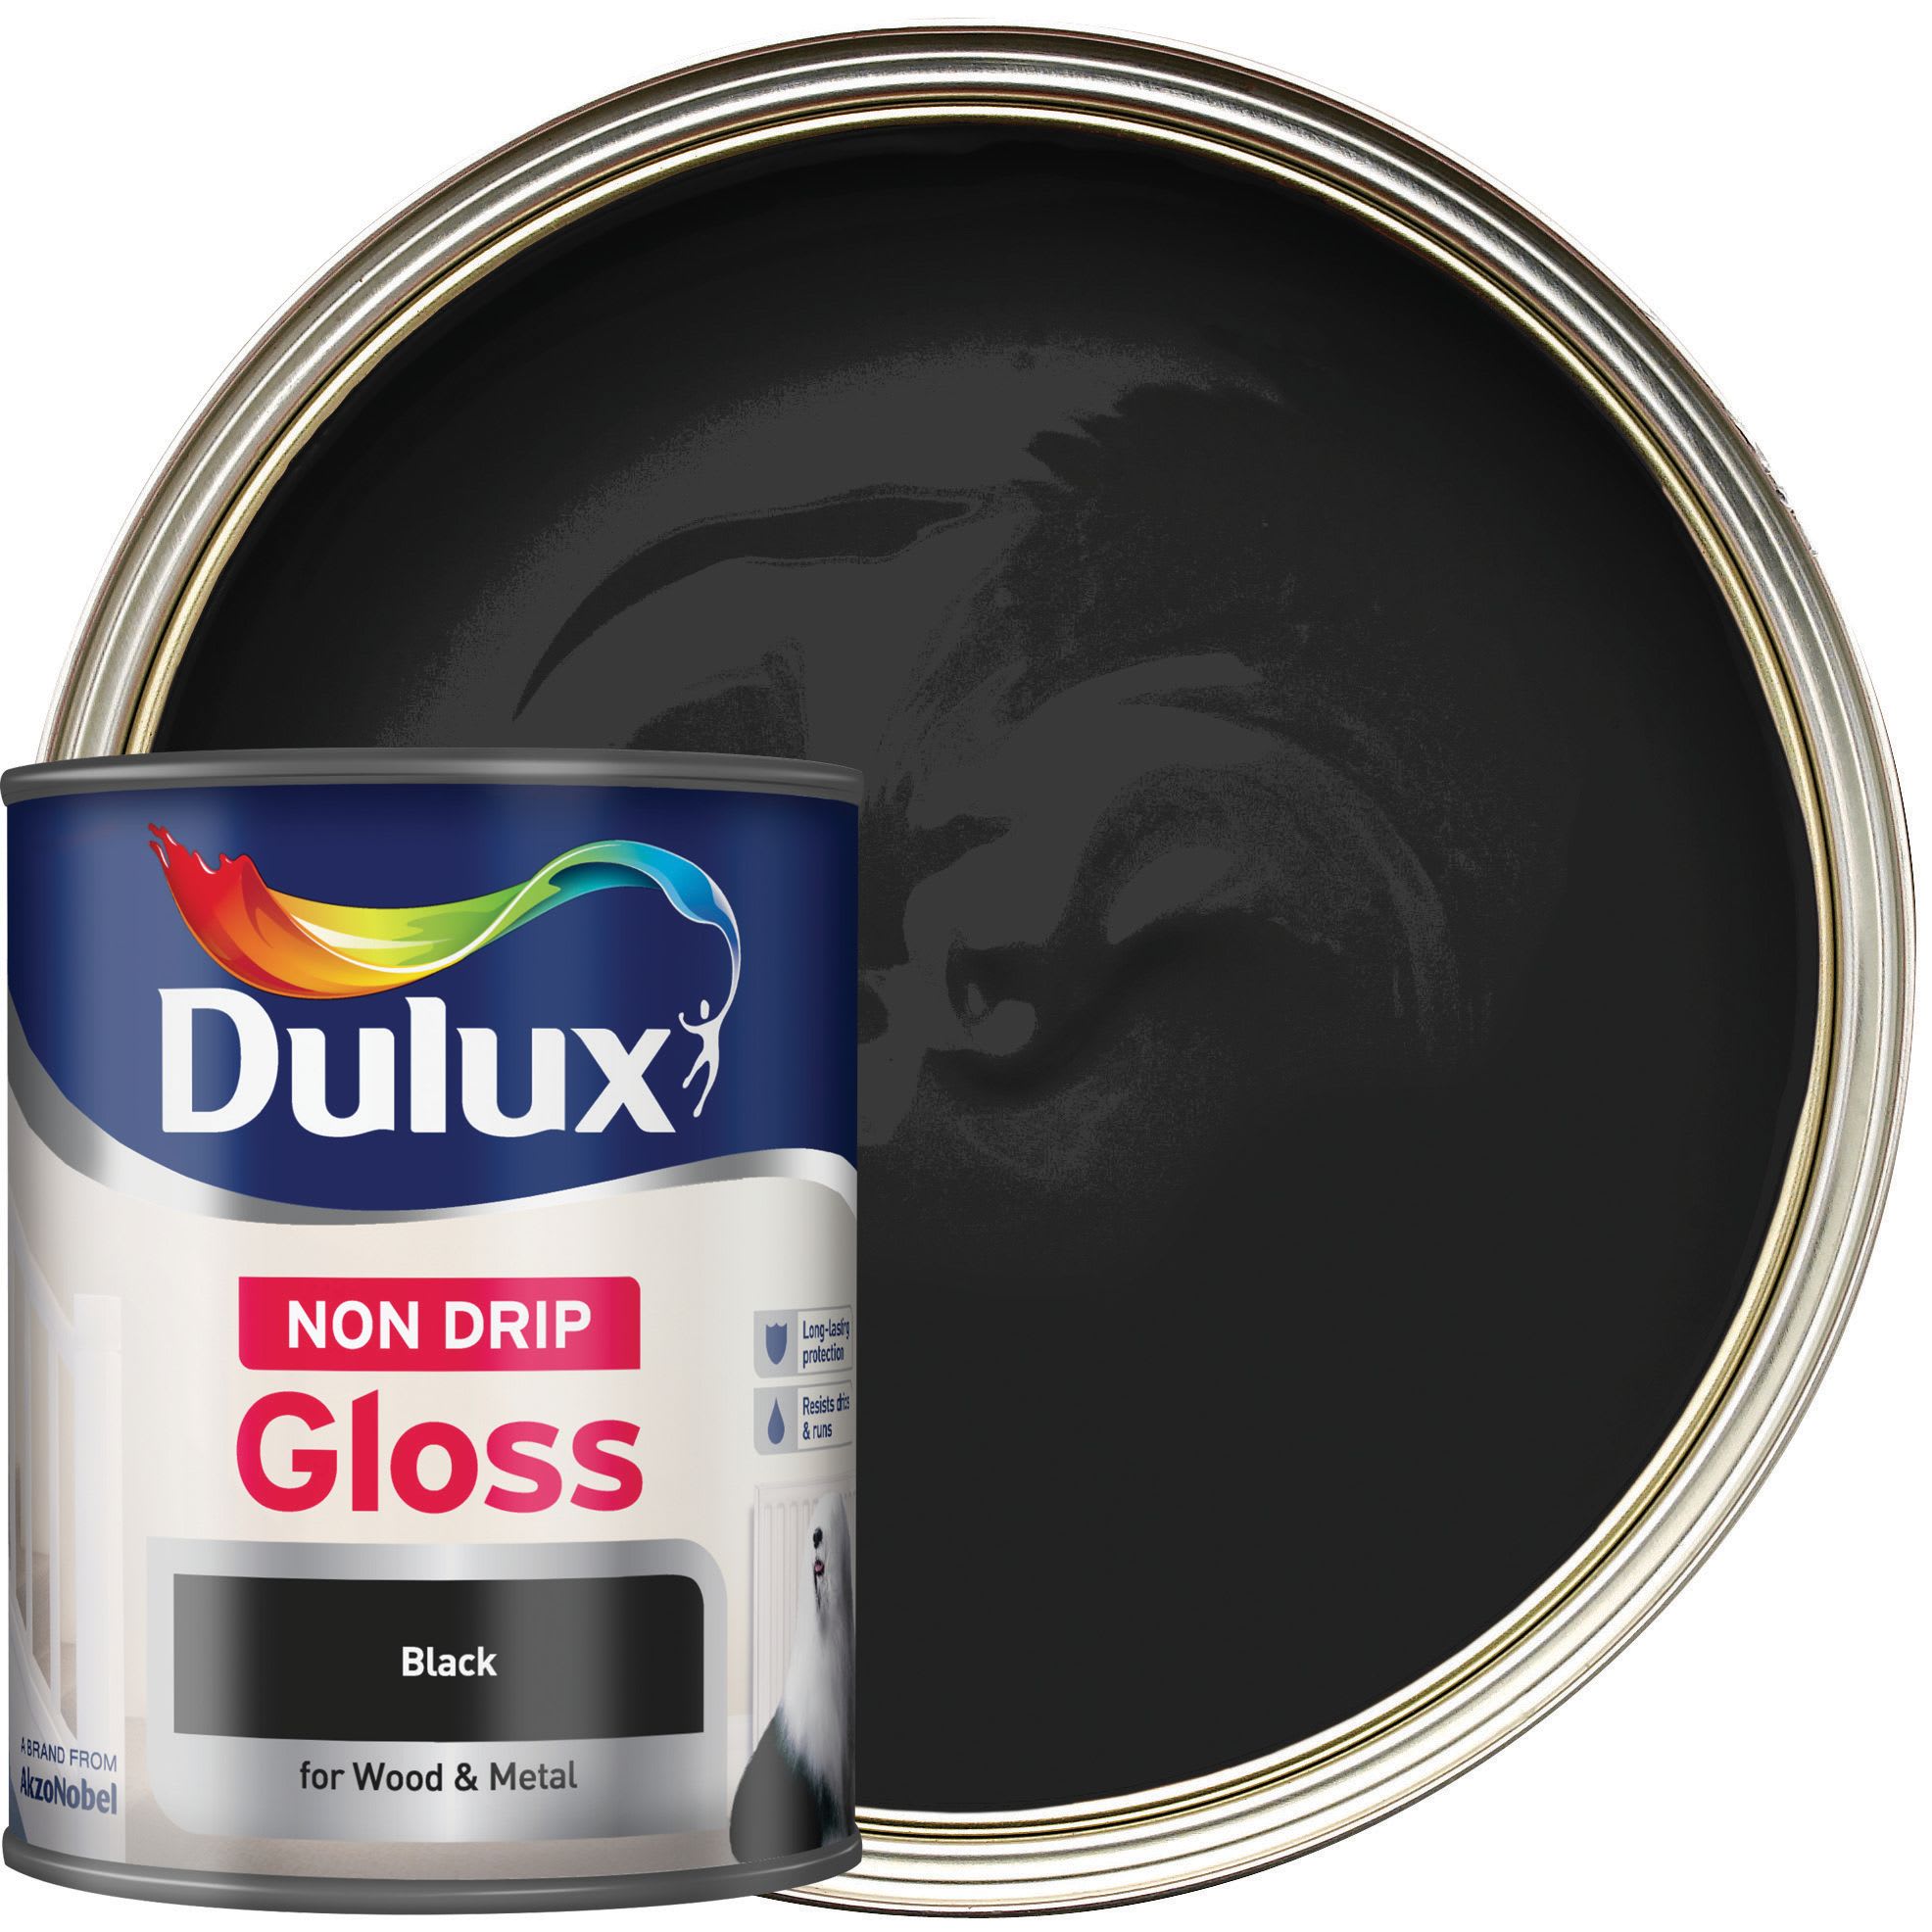 Offer Wickes Dulux Non Drip Gloss Paint - Black - 750ml